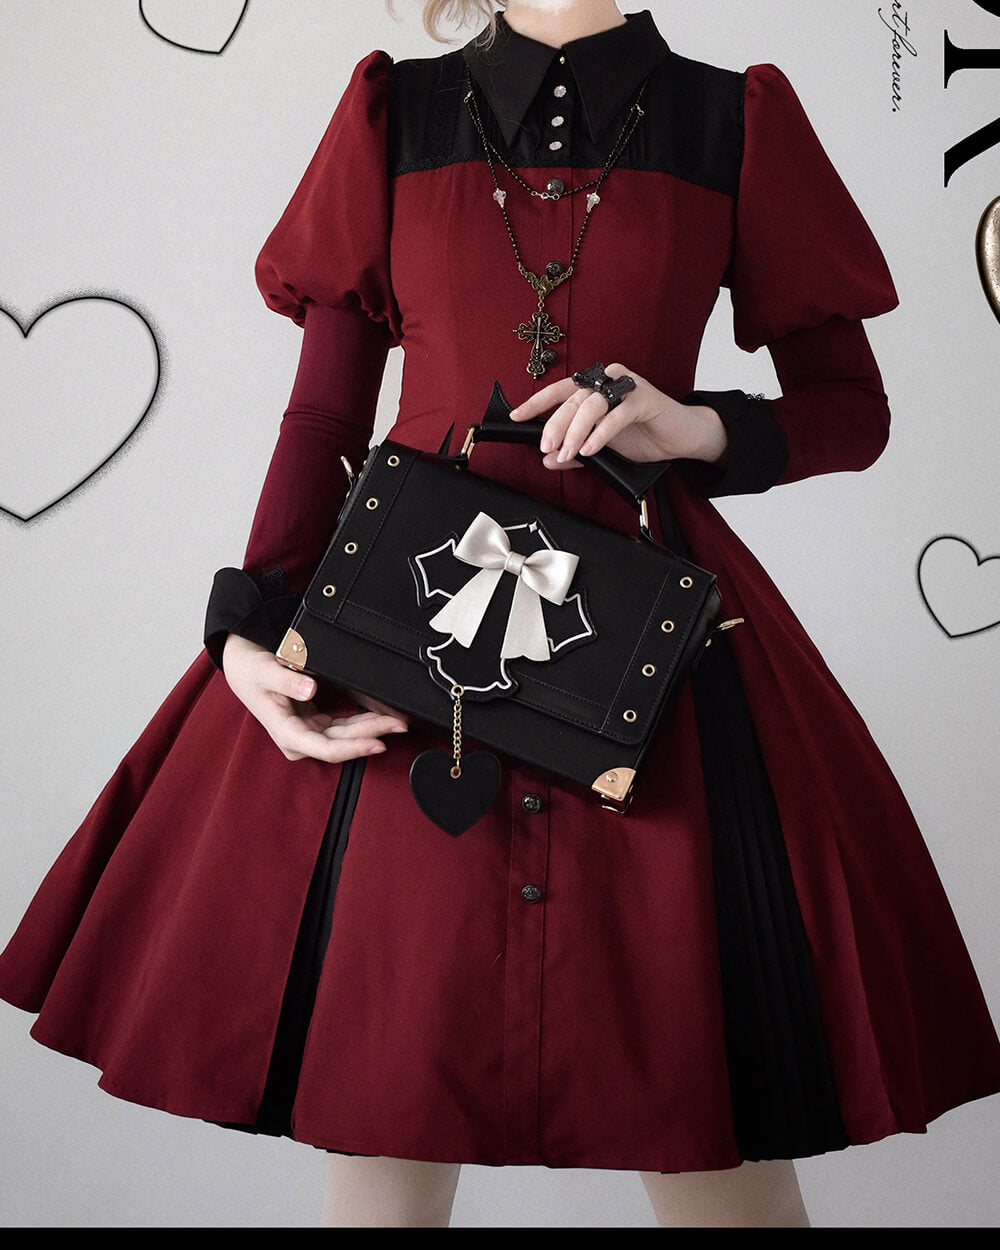 black-red-lolita-outfit-styled-by-the-bat-cross-bow-stud-black-jk-bag